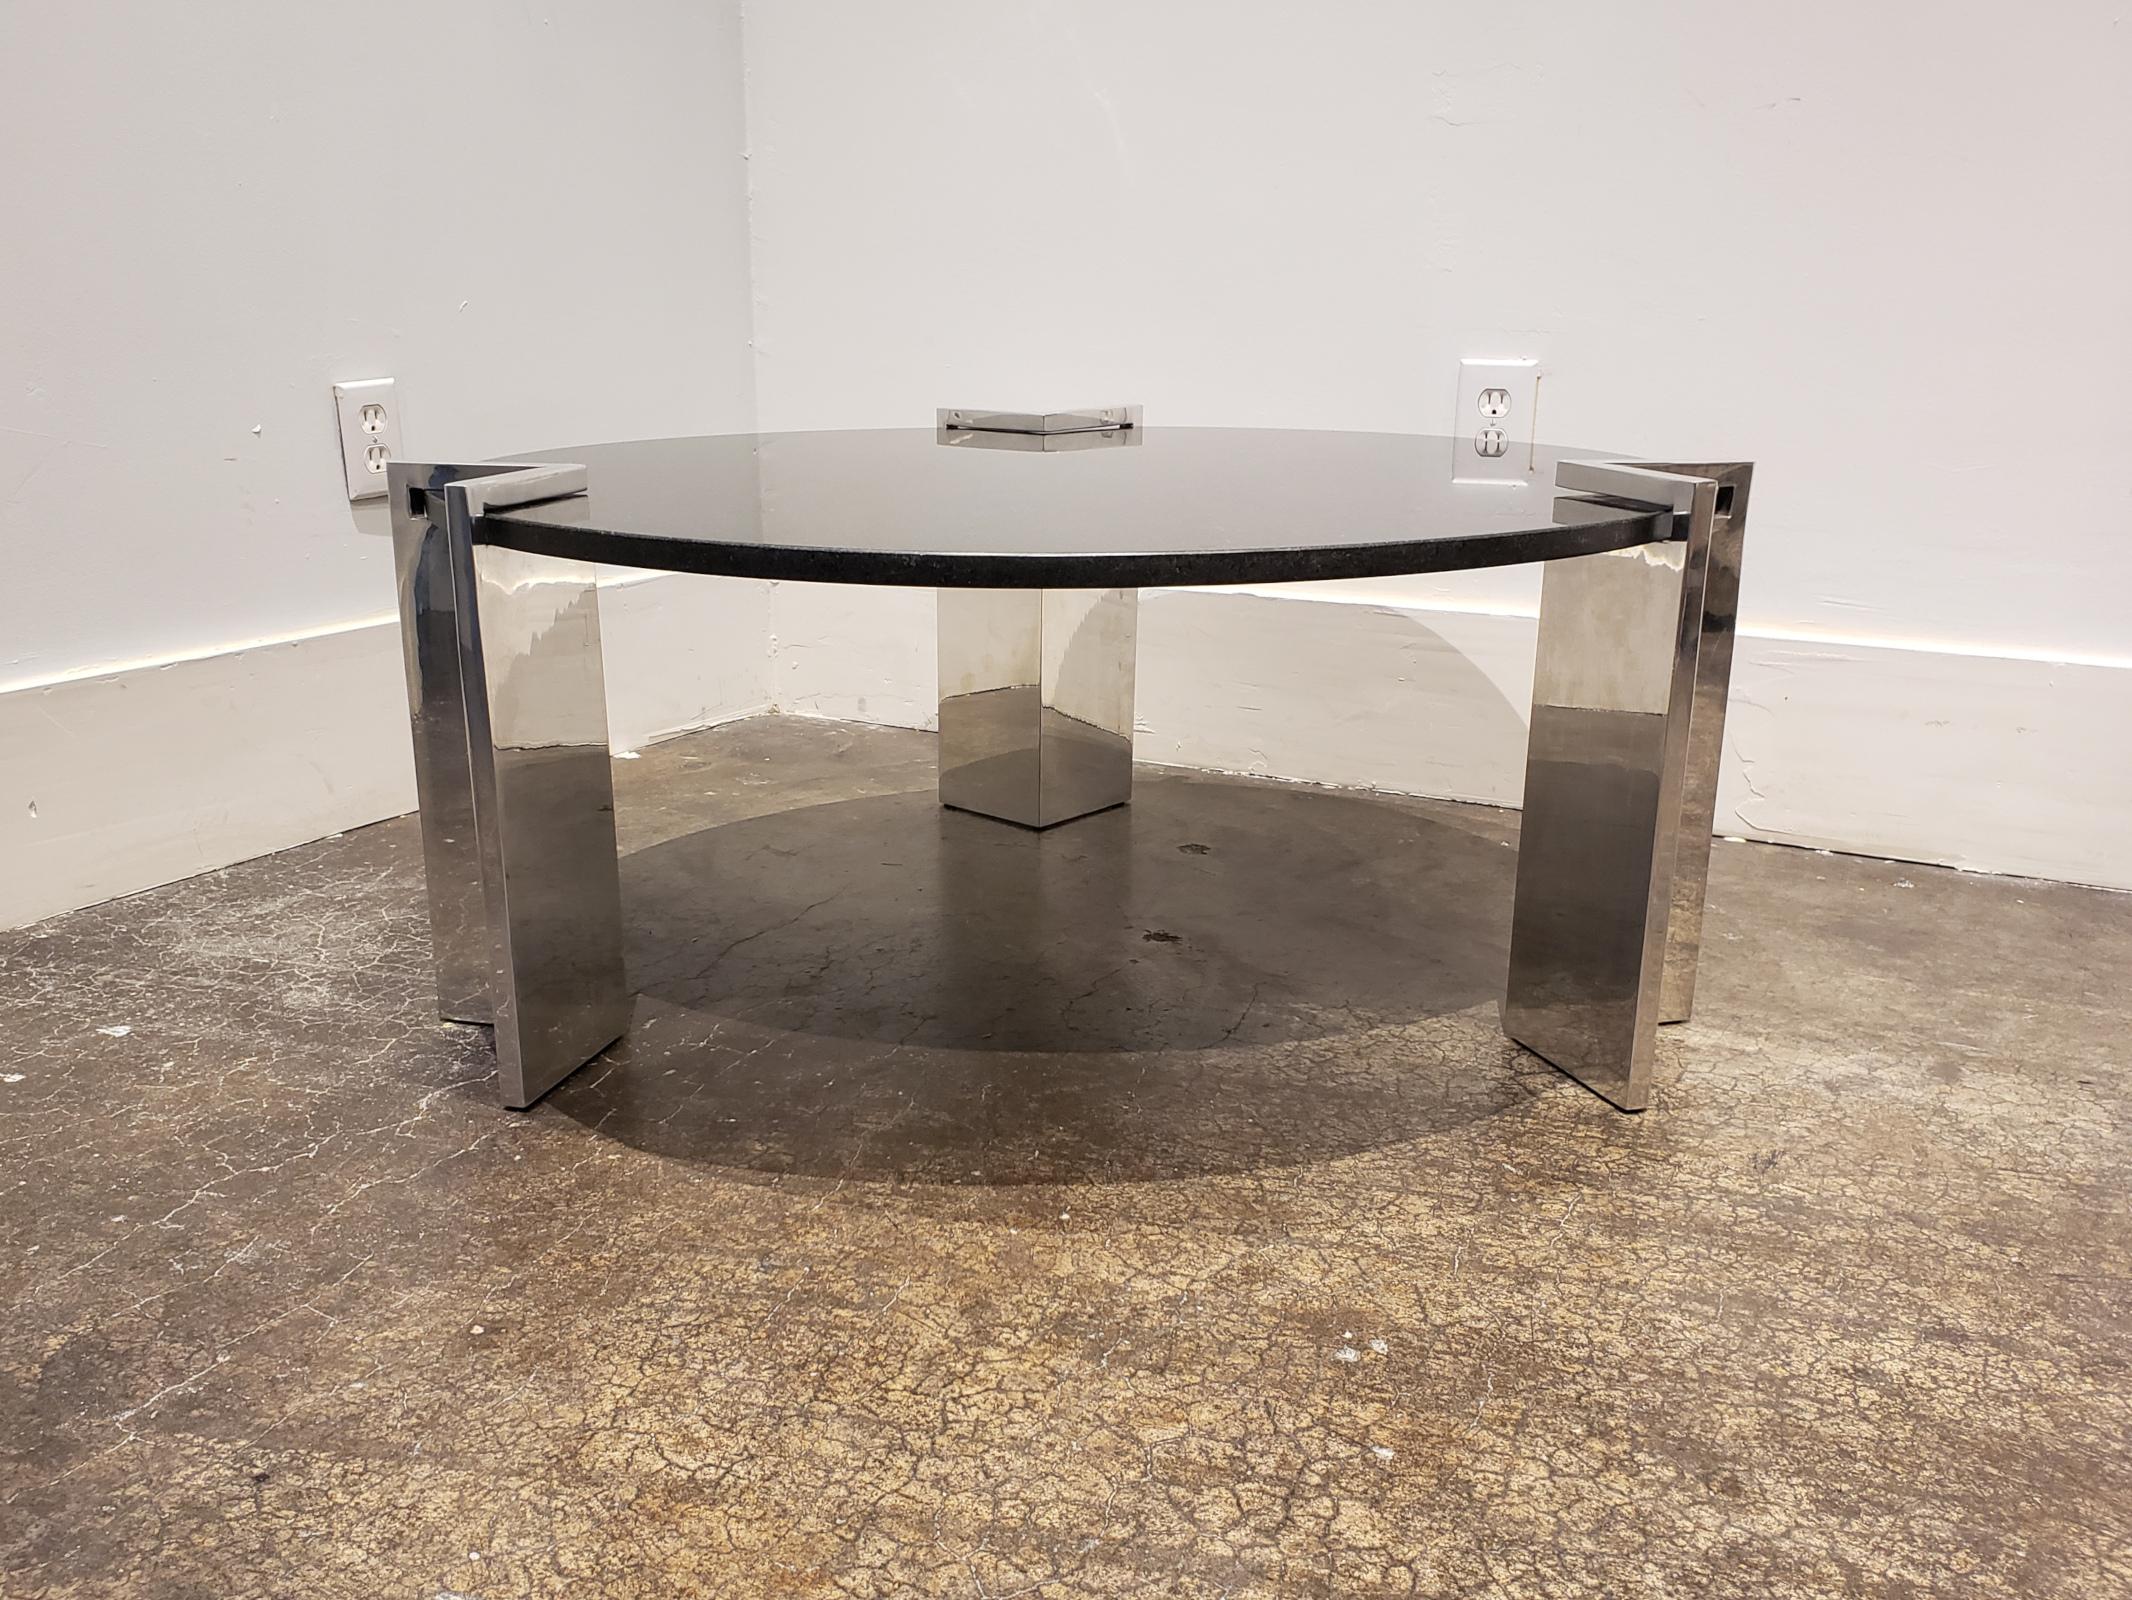 Beautiful modern coffee table with black granite top with white and gold specks. Has three thick, V-shaped, slip-on aluminum legs which come off for easy transport. Top is in great condition with no damage. Legs are in good condition with minor